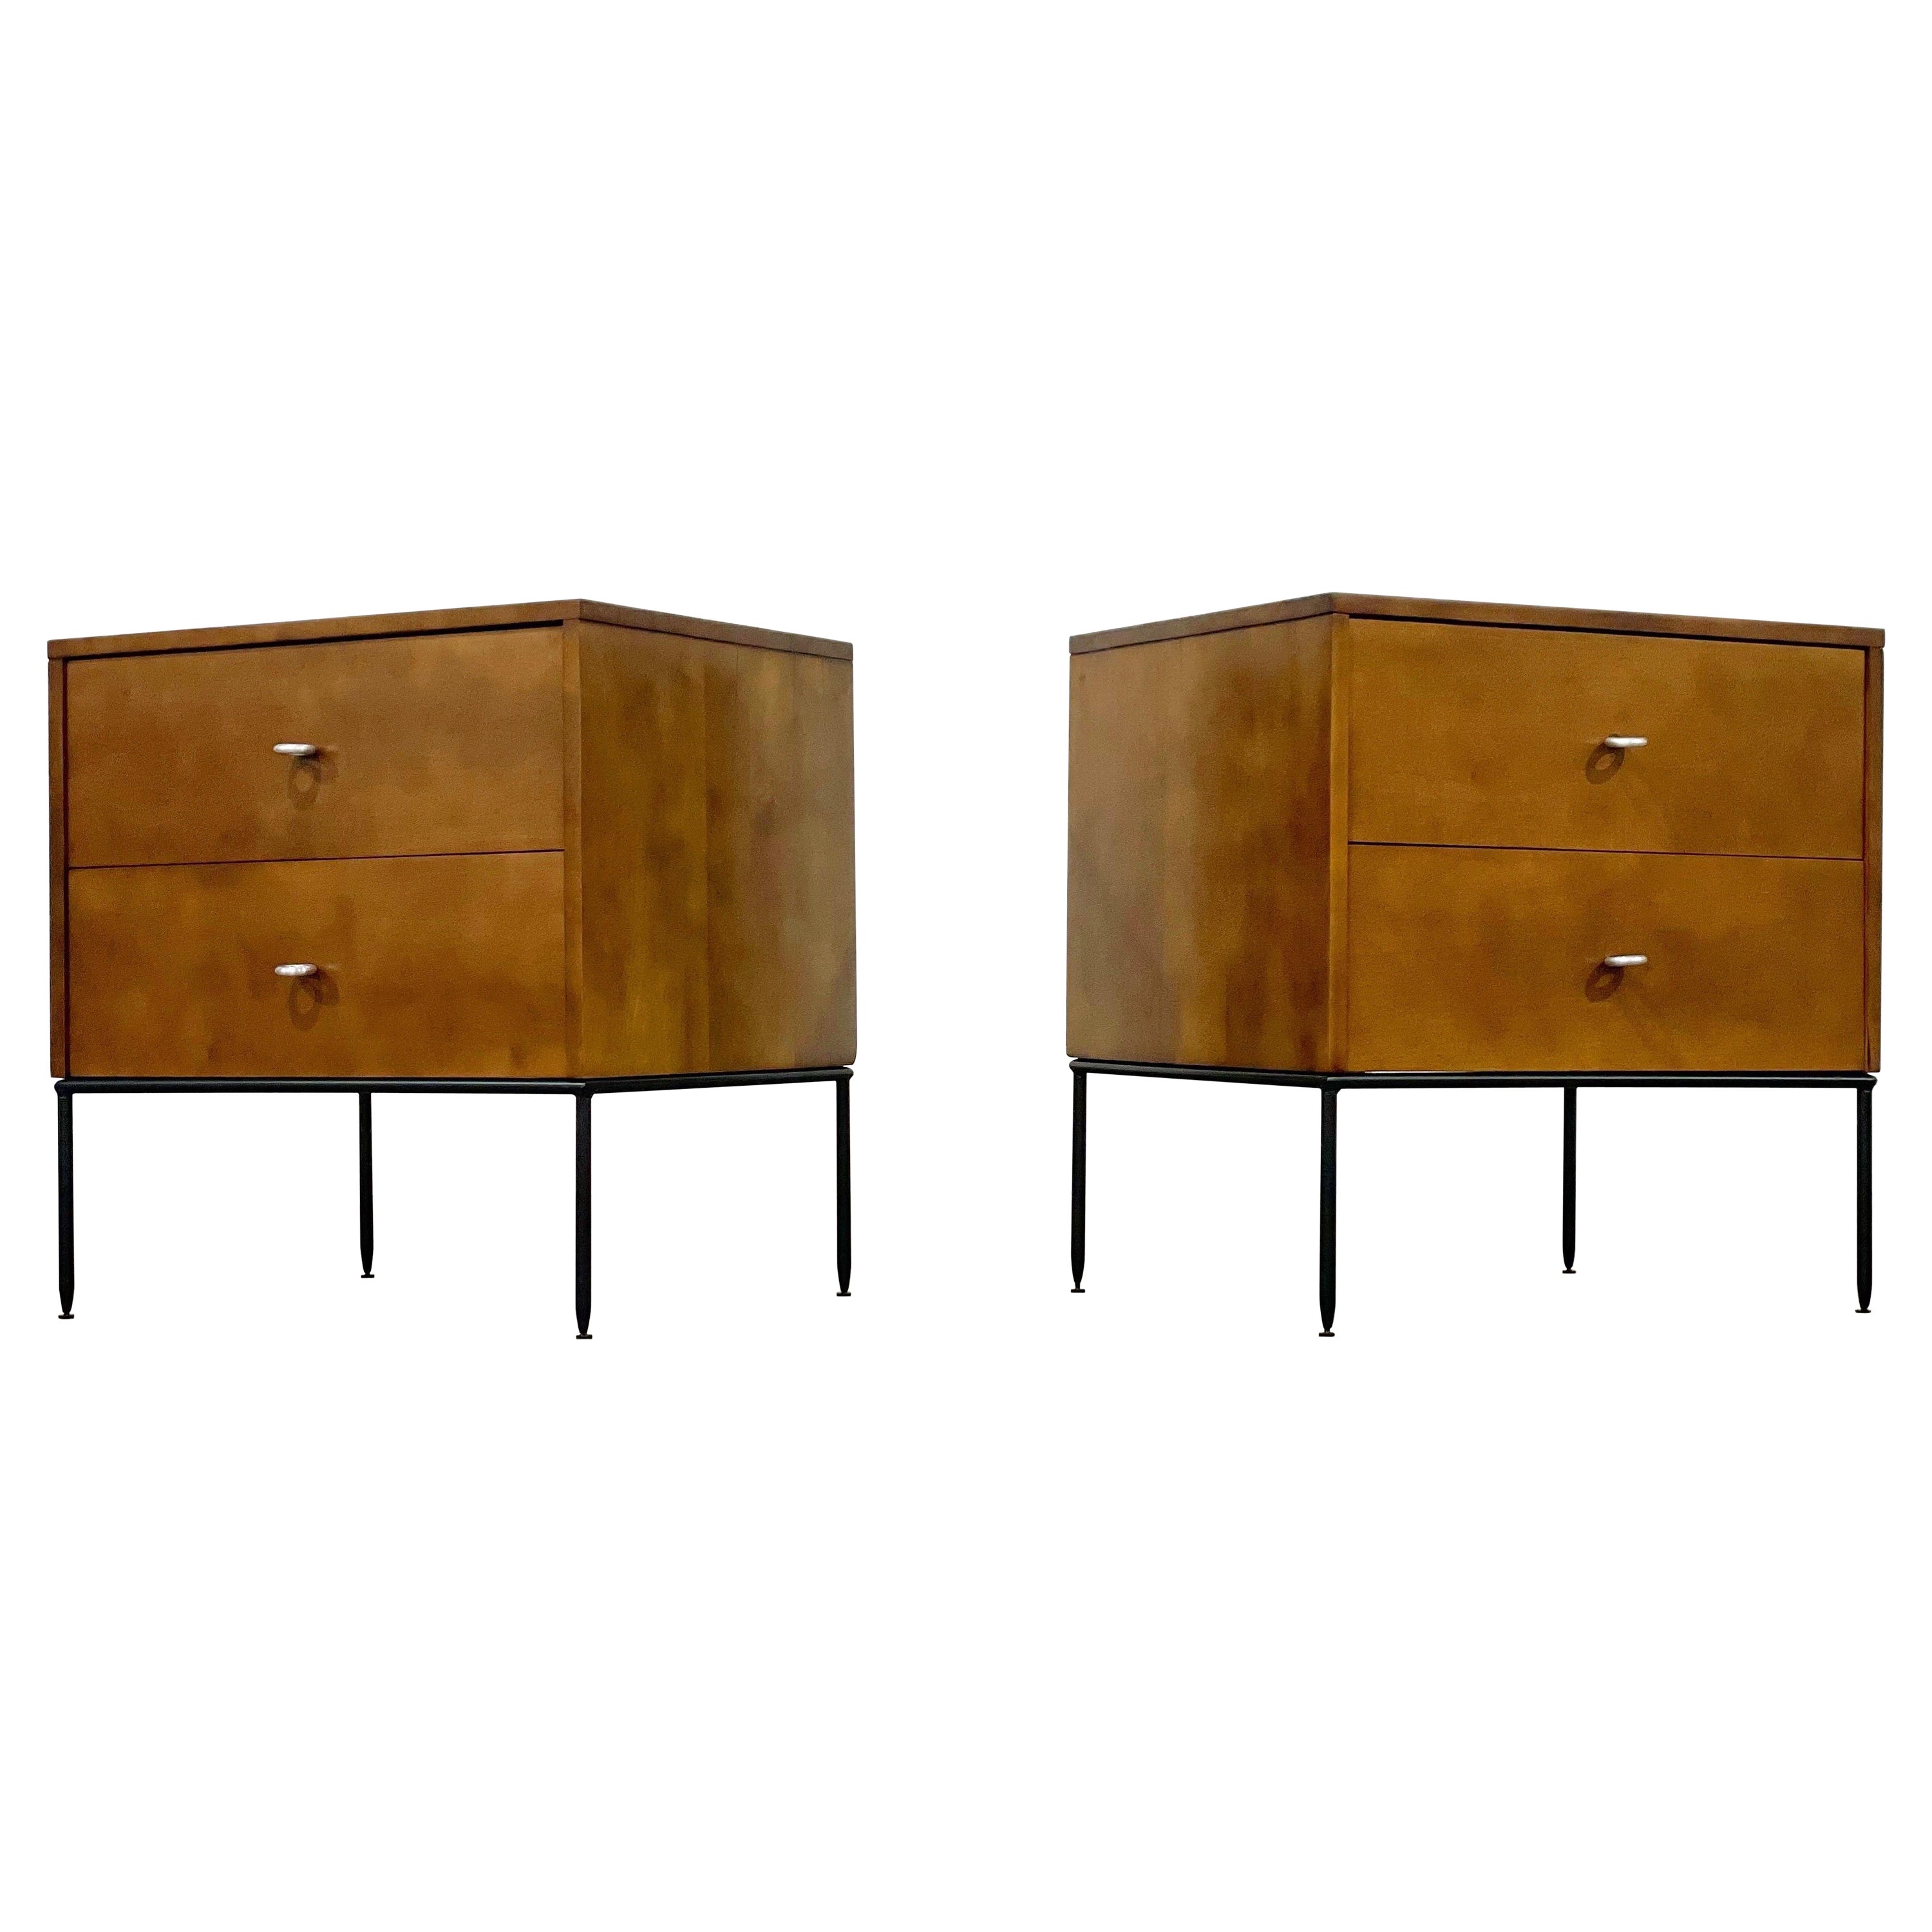 Midcentury Paul McCobb Nightstands #1503, Two Drawer on Iron Bases O-Ring Pulls